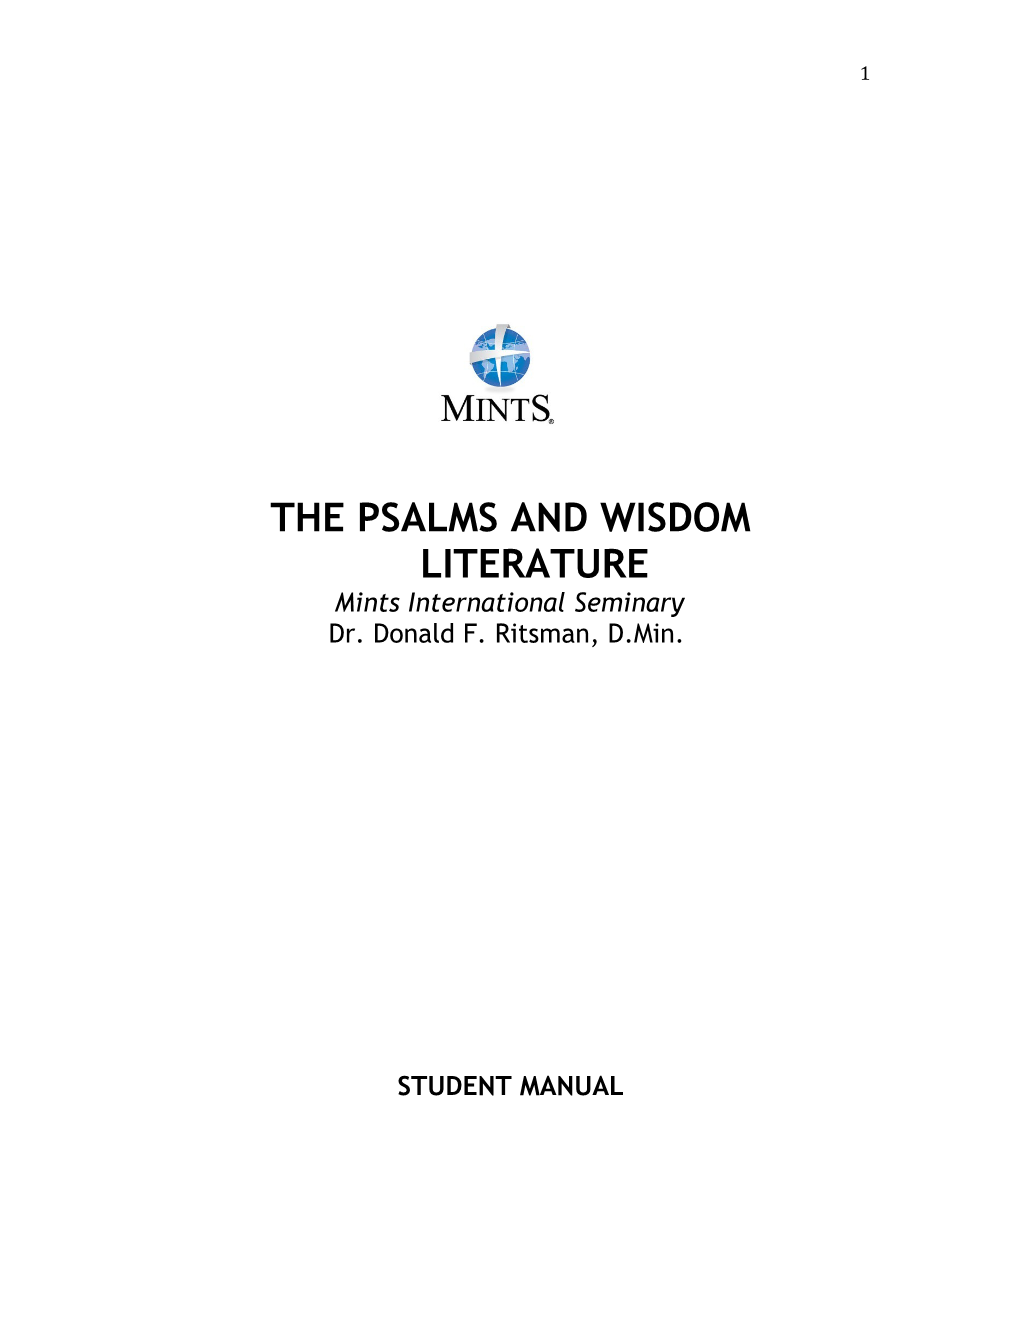 The Psalms and Wisdom Literature